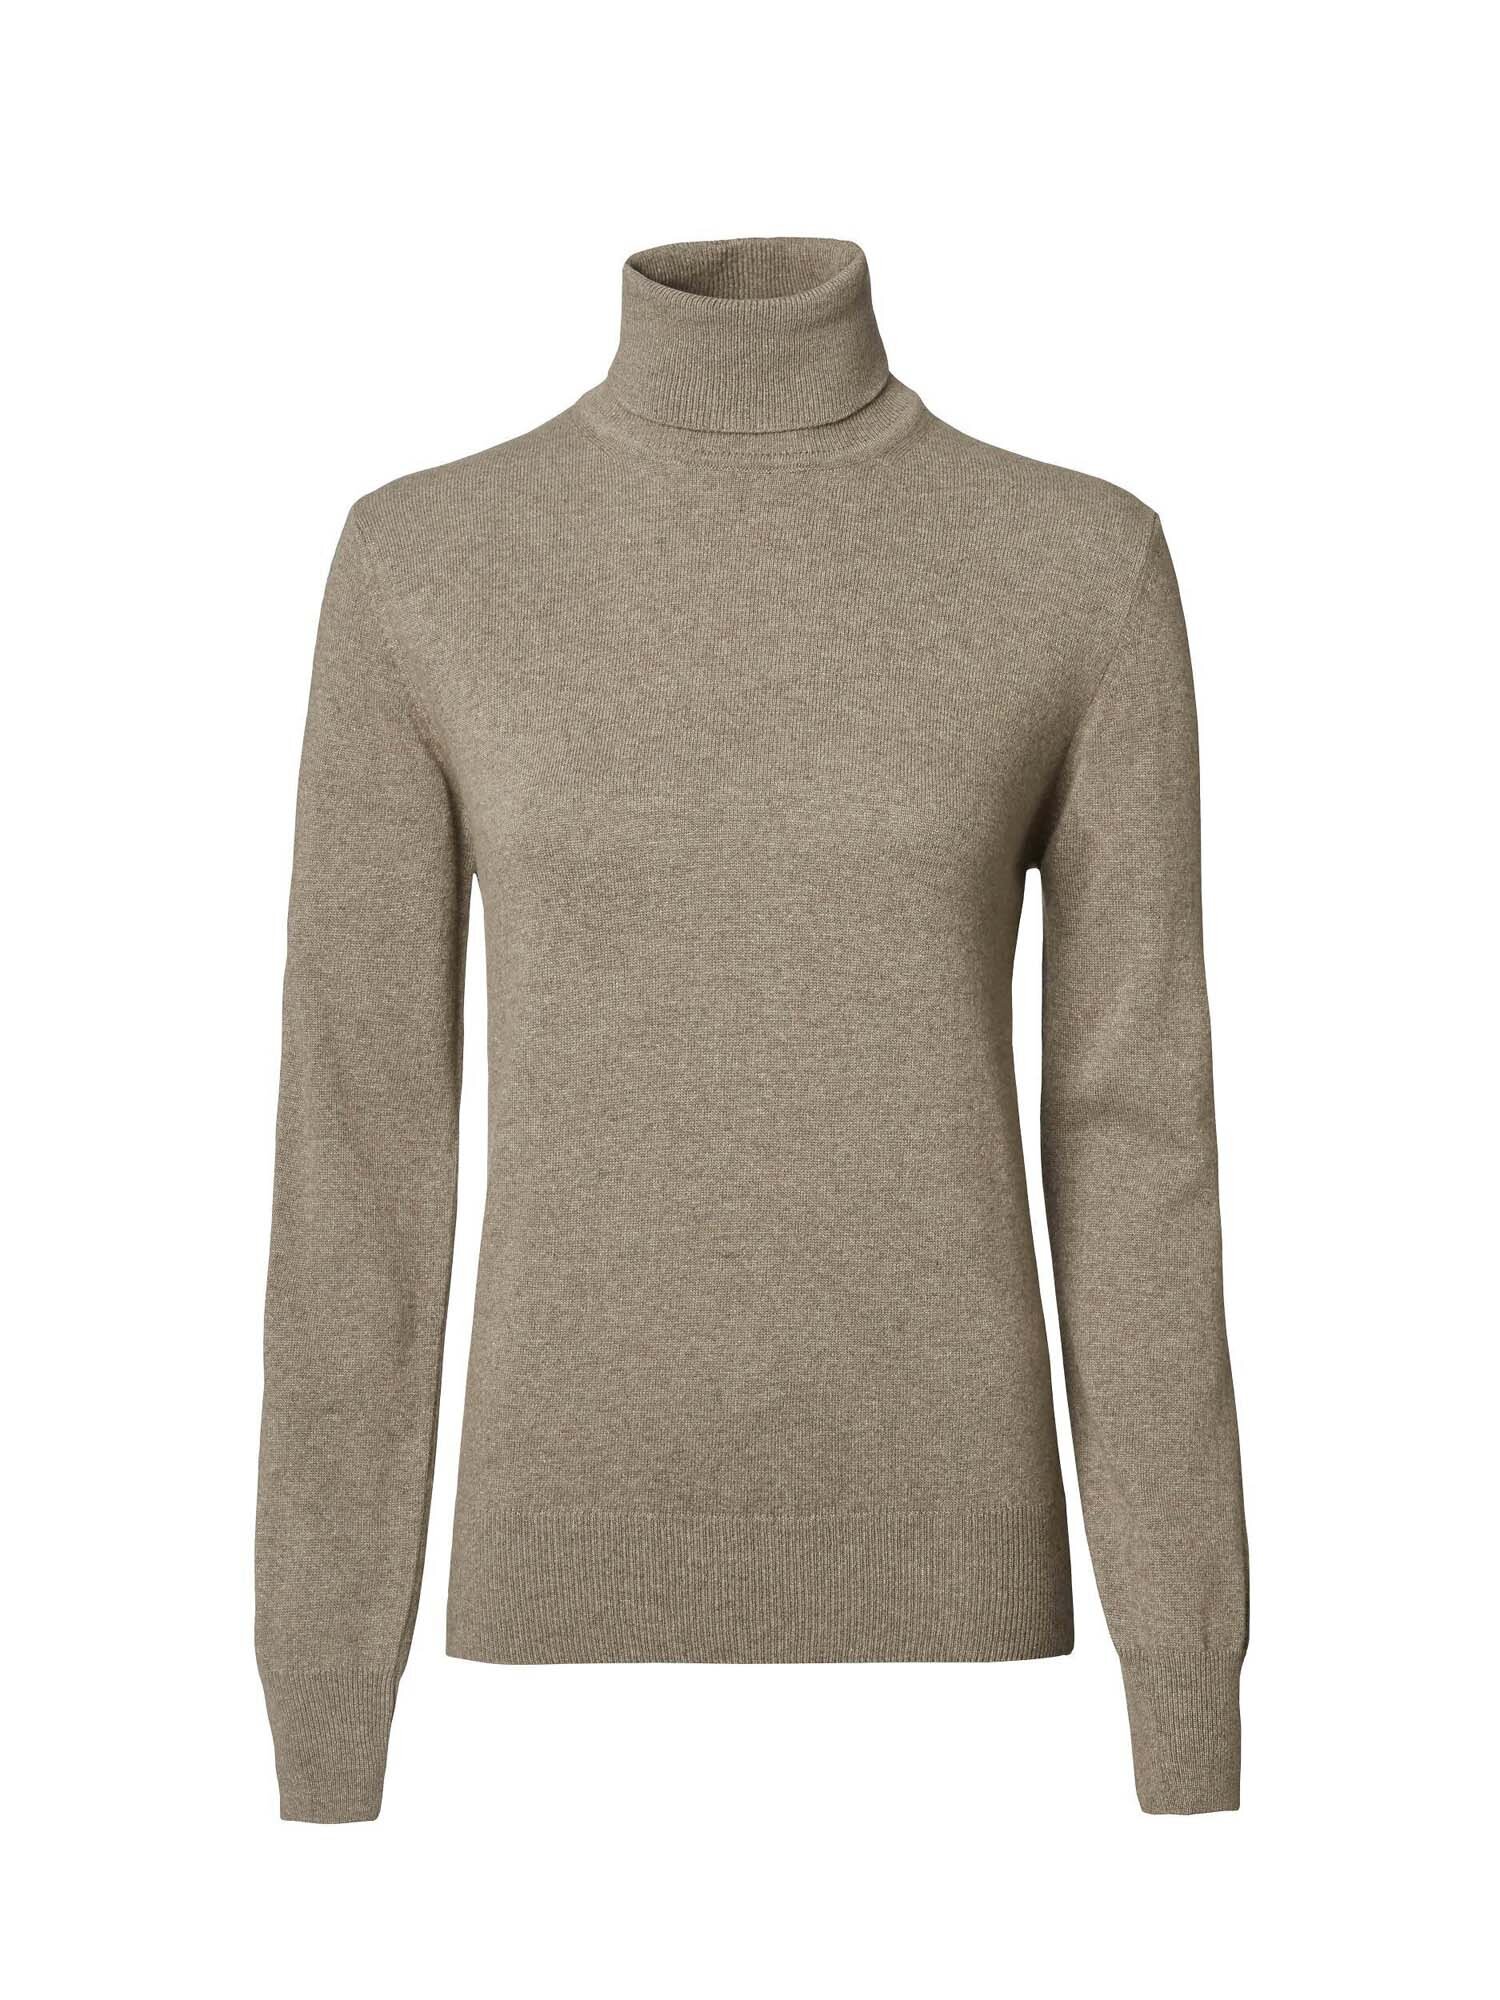 Select Hartwell Rollneck Wool Pullover Women